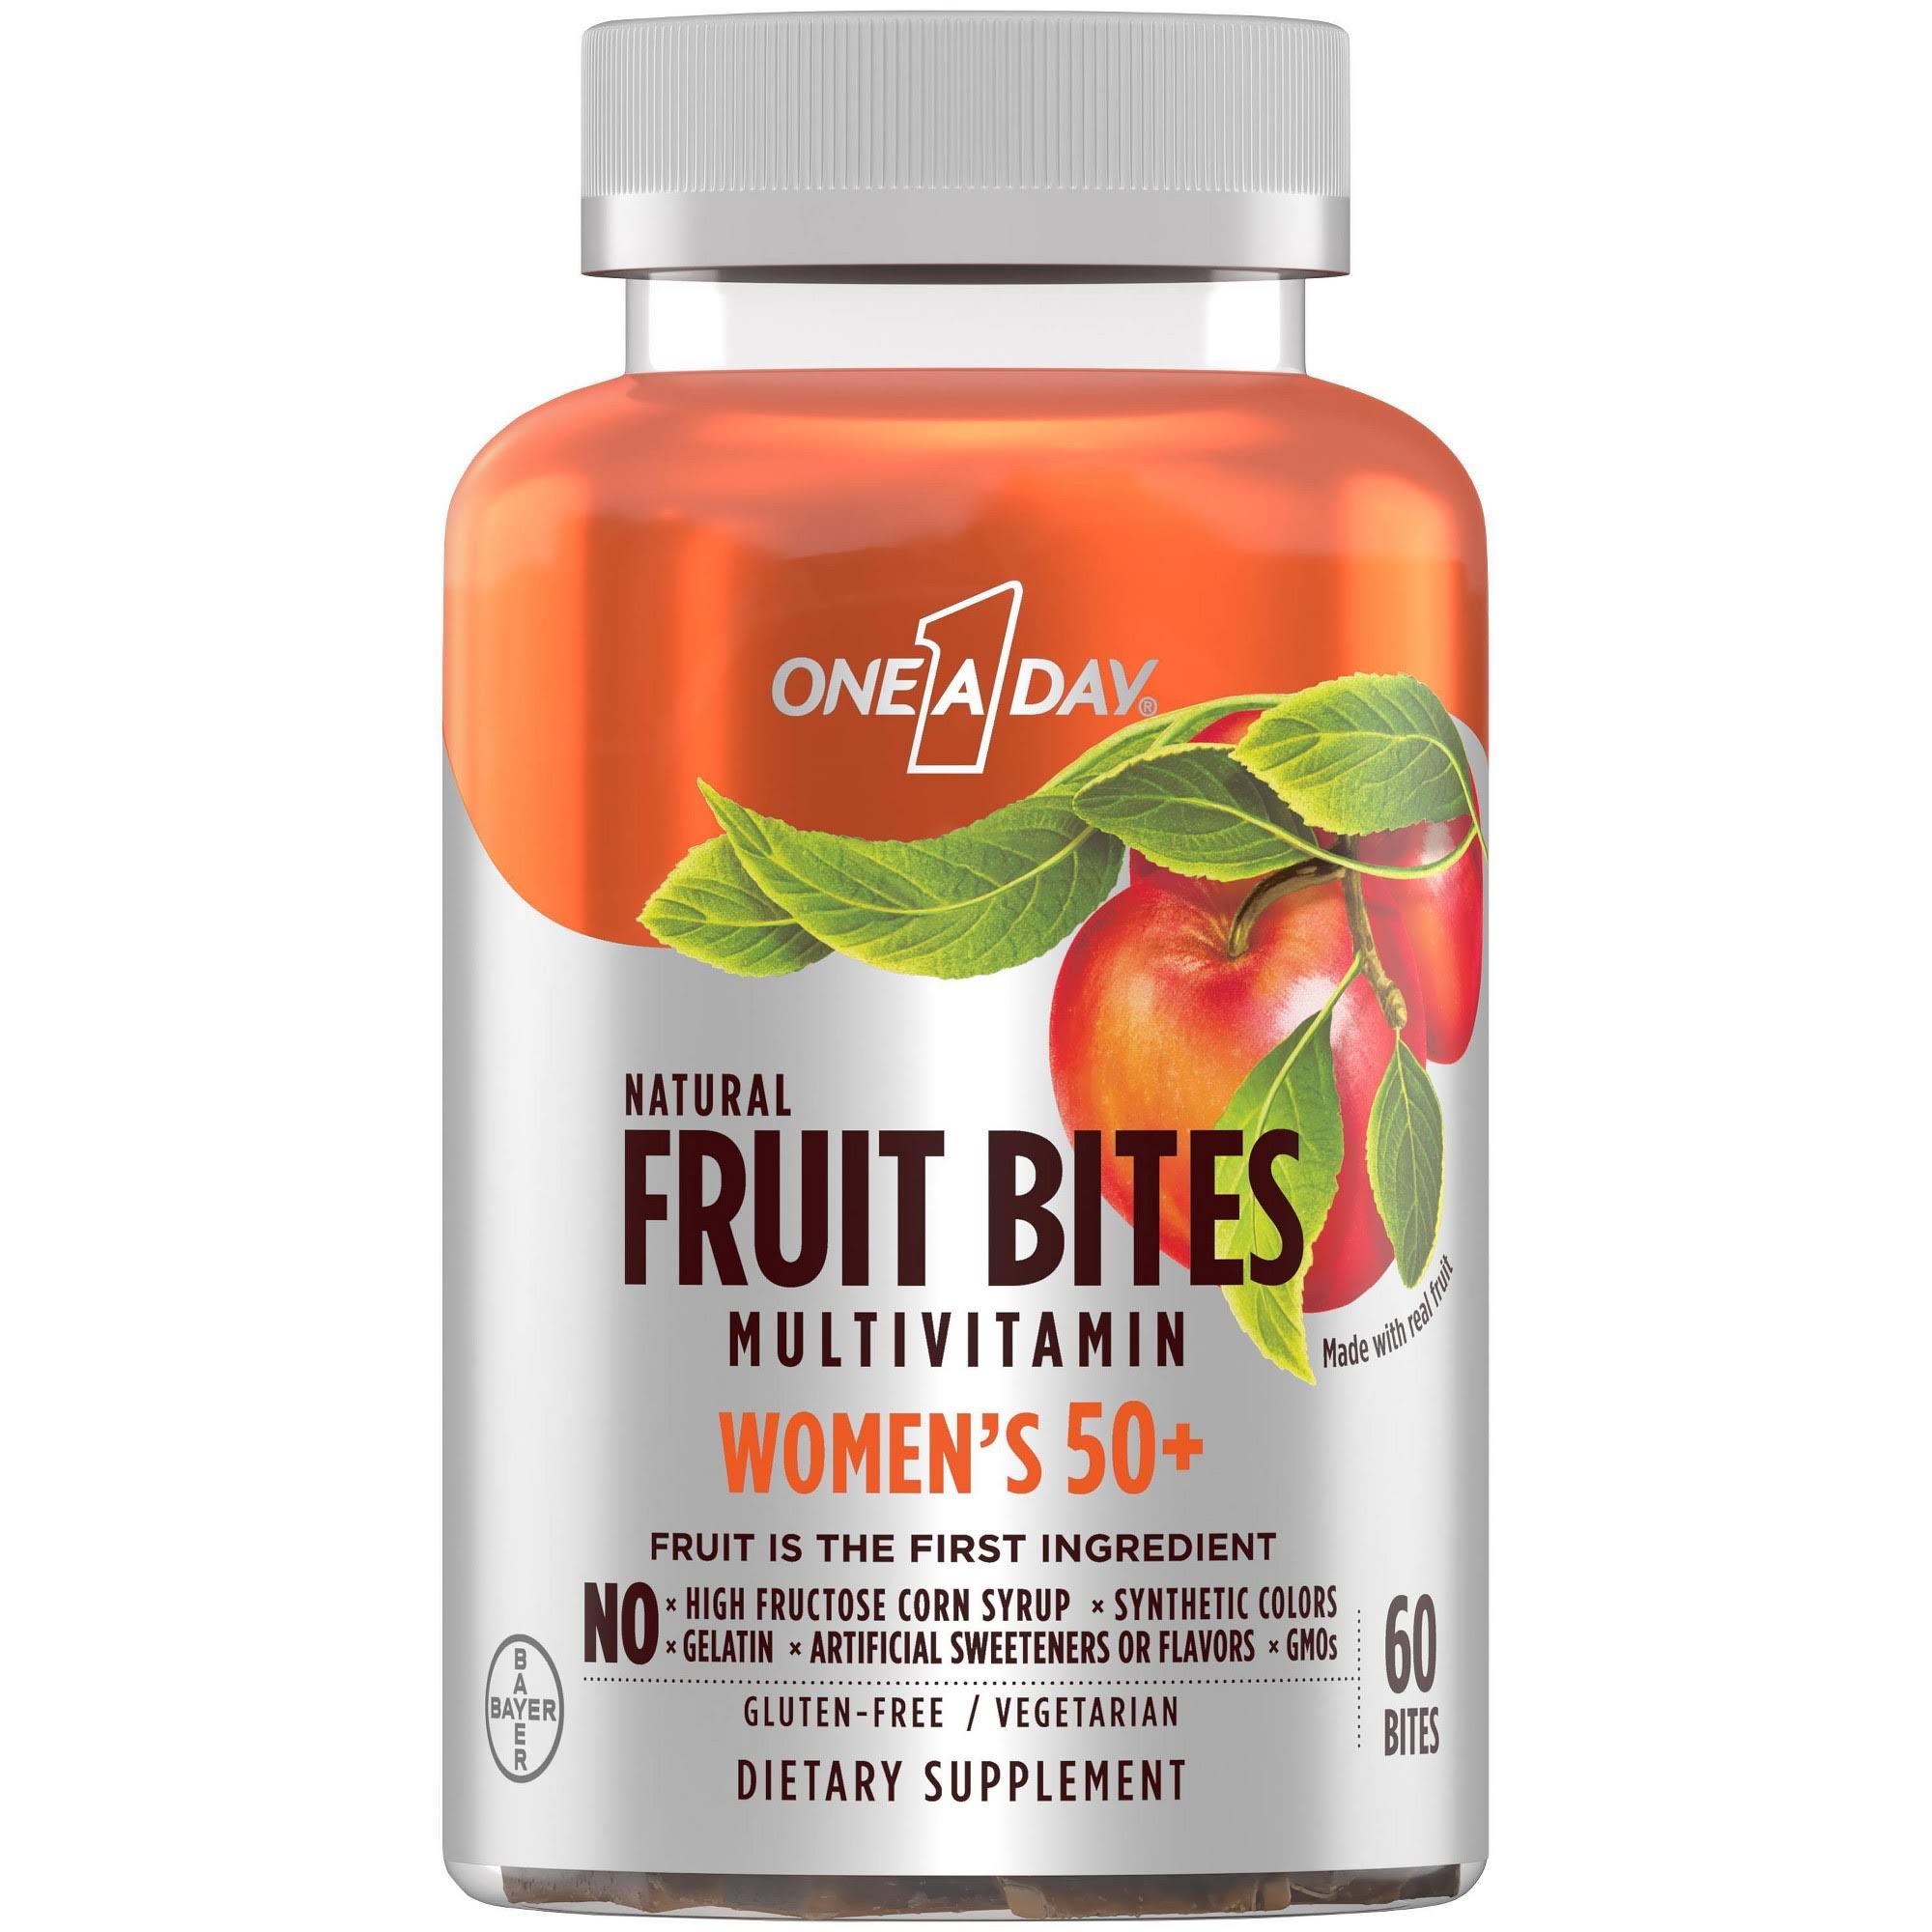 One A Day Women's 50+ Multivitamin, Natural Fruit Bites, 60 EA